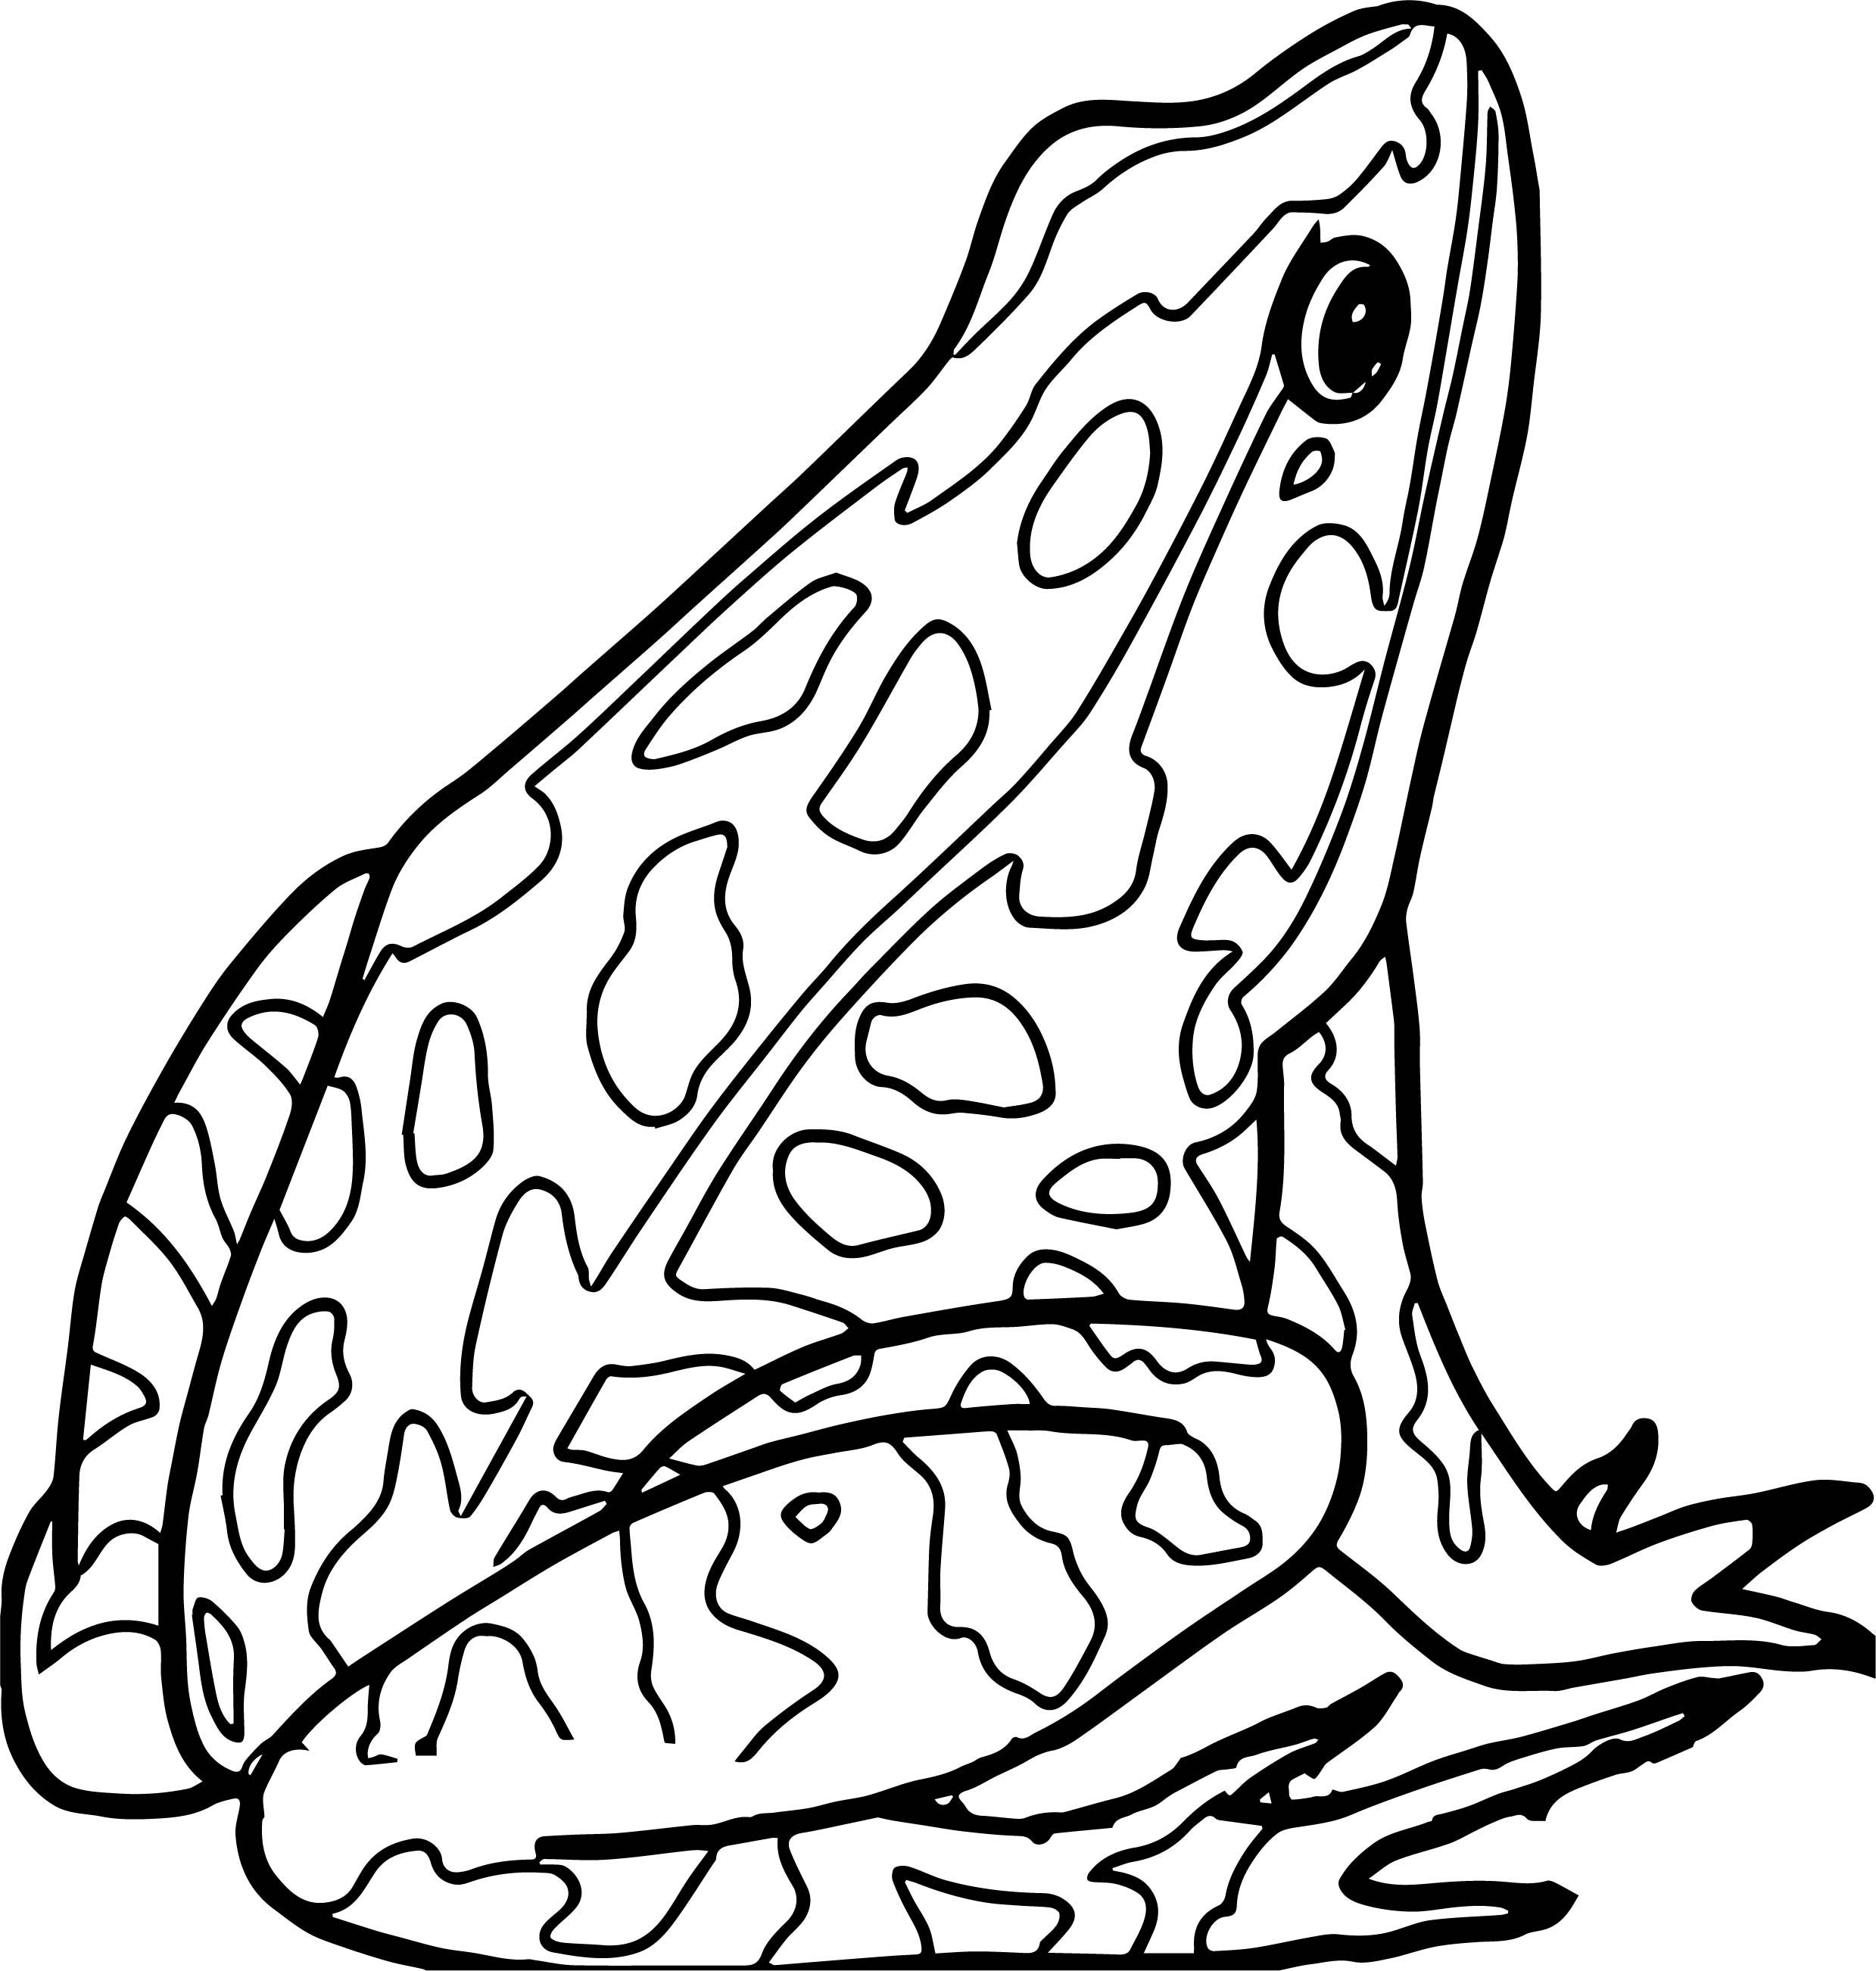 Printable Amphibian Coloring Pages - Printable Amphibian Coloring Pages